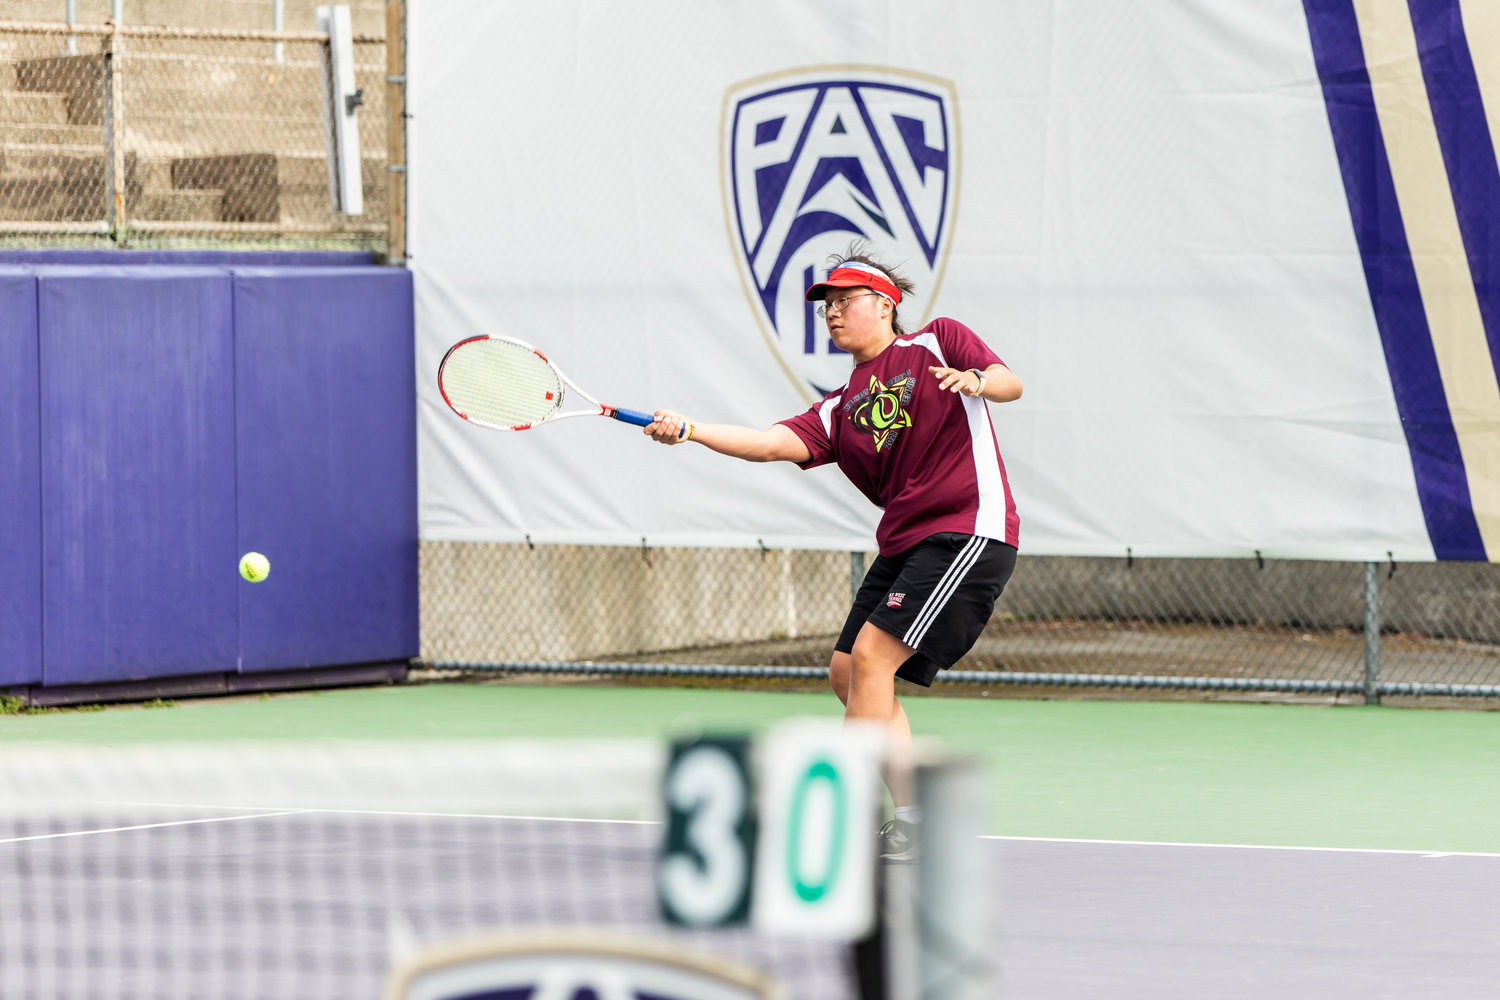 W.F. West's Justin Chung watches his hit during the first set of the 2A boys' singles tennis state competition on May 27, 2022.